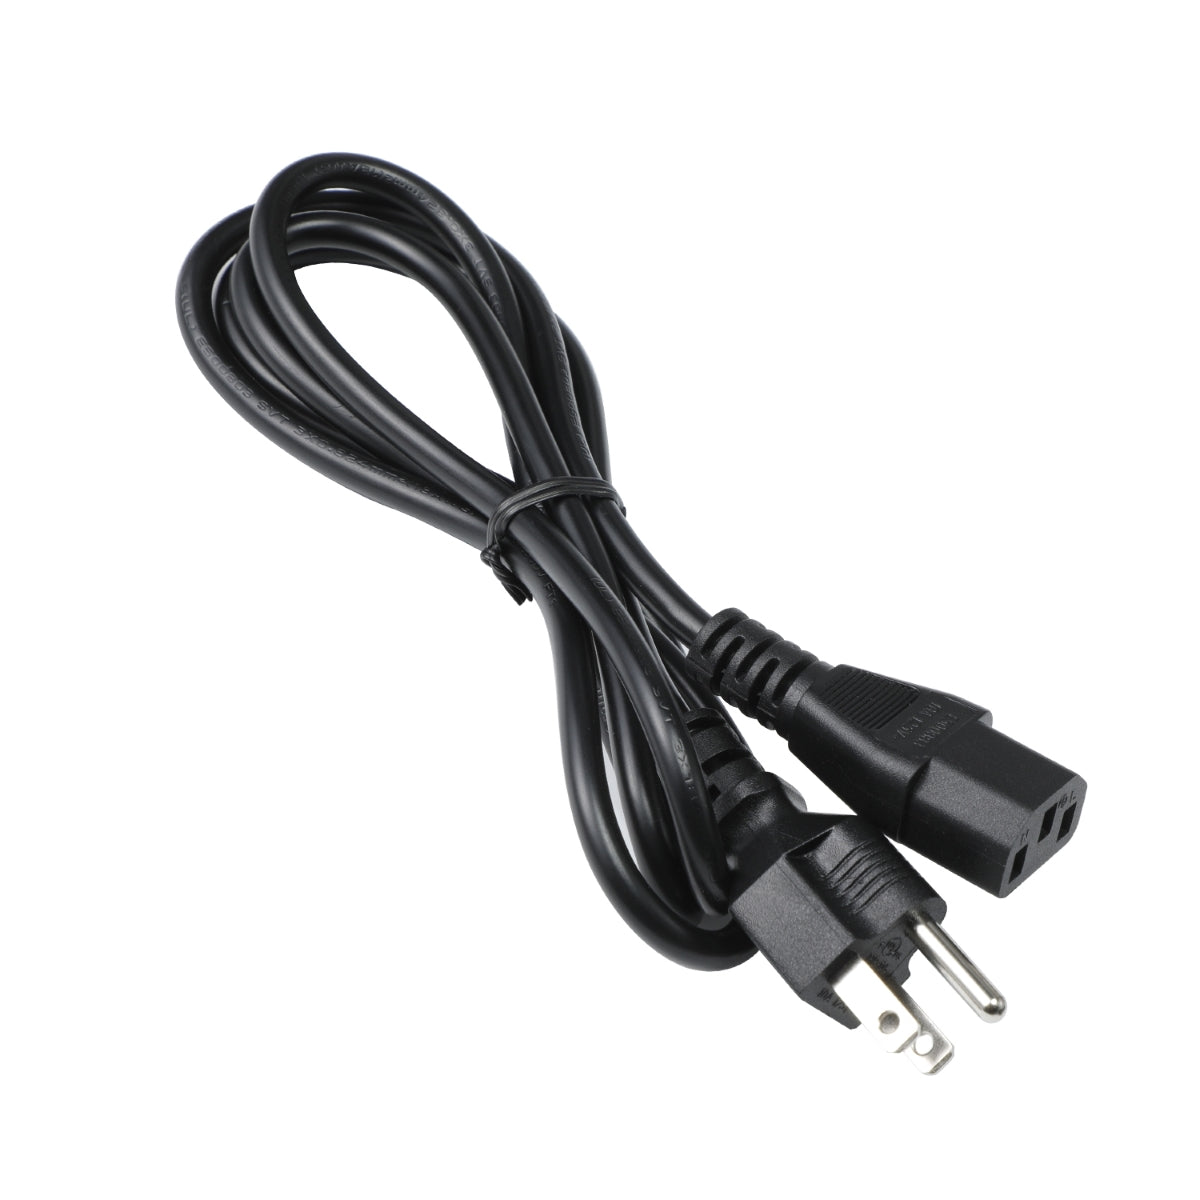 Power Cord for HP Pavilion 550-112 Computer.